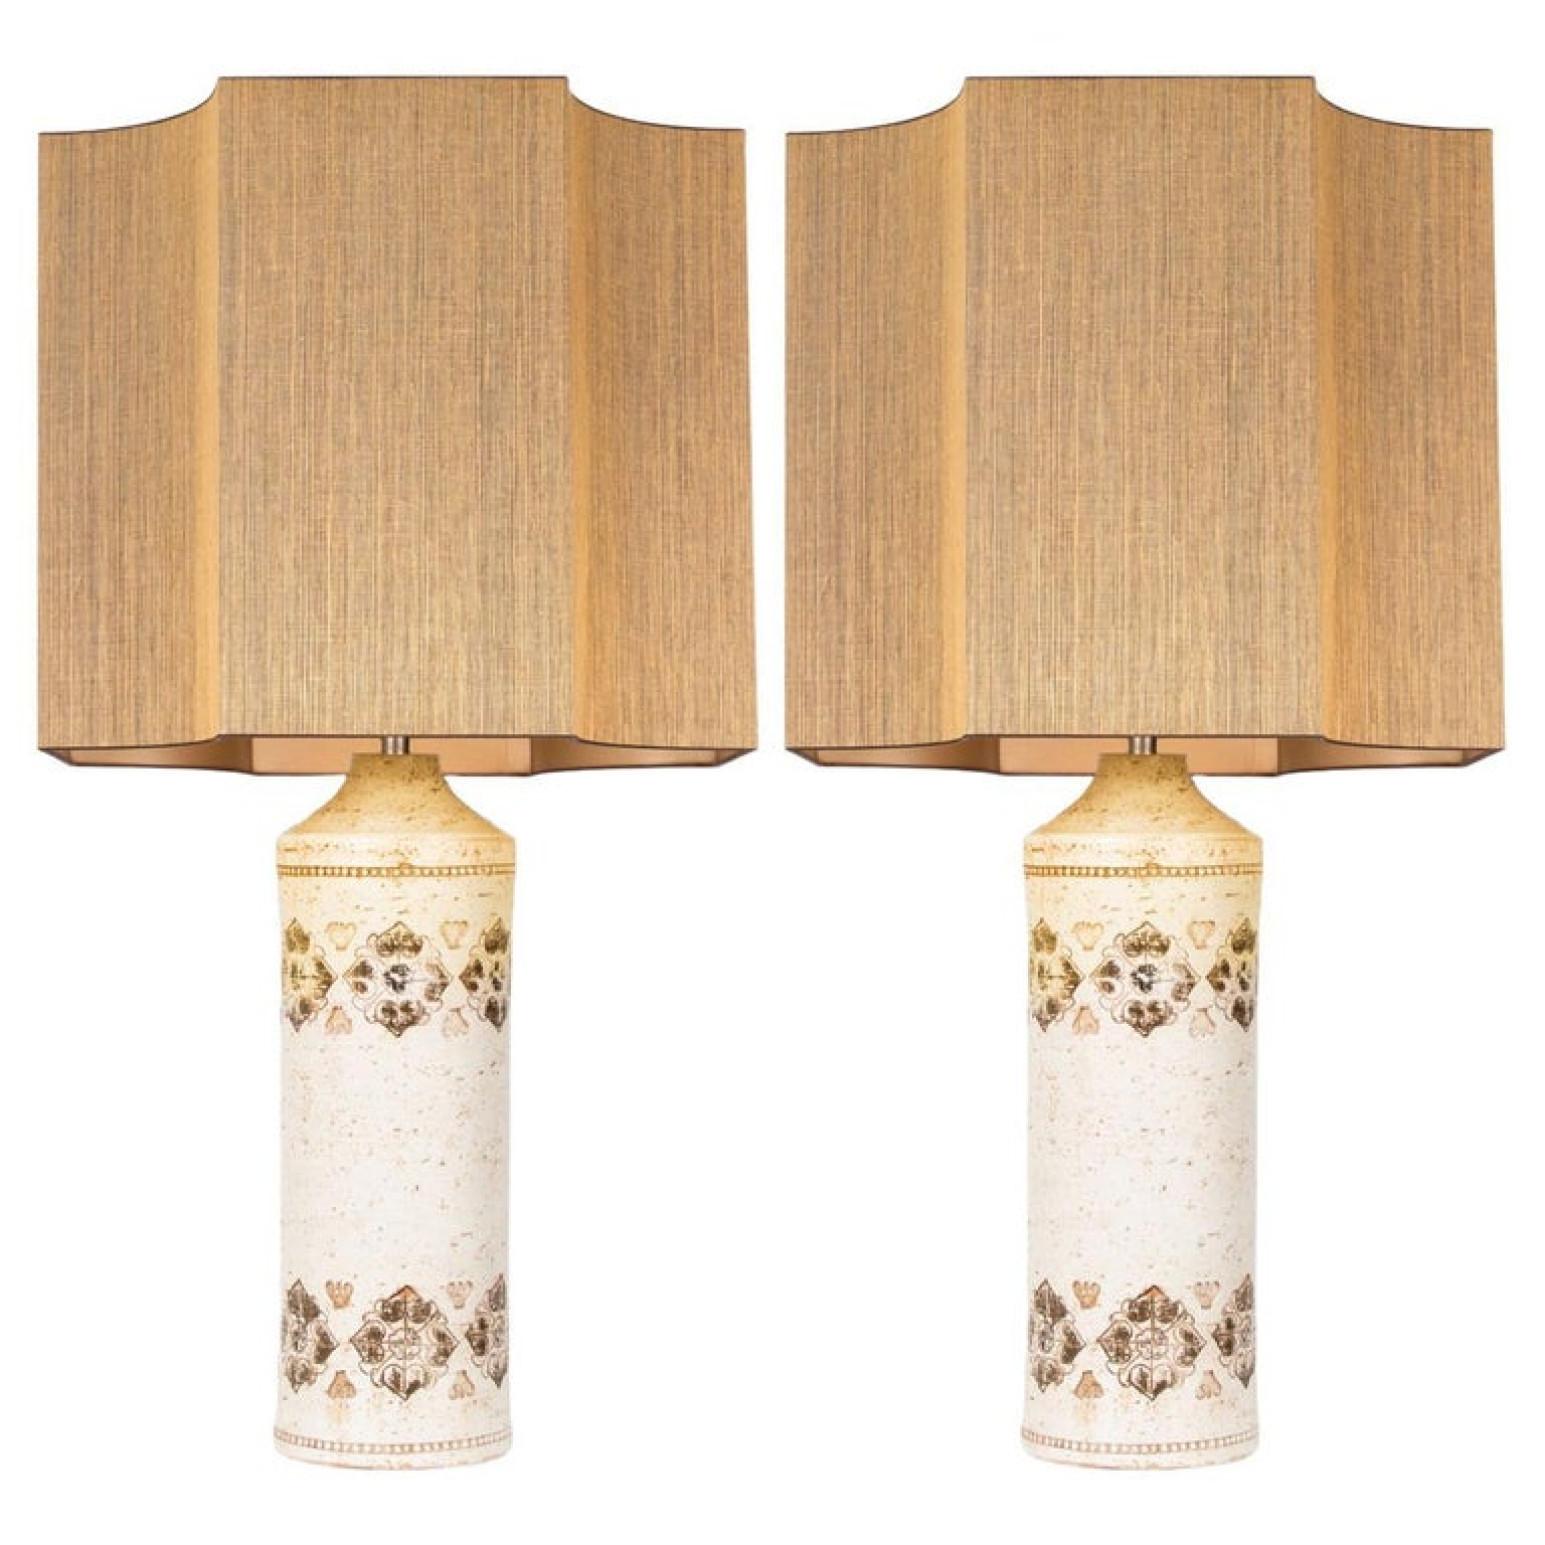 Pair of this Bitossi lamp features a ceramic base with a white glaze in the and patterns of brown, Bitossi, Italy, circa 1960s. With an exceptional new custom made shades by René Houben. With warm gold inner-shade.

Approximate dimensions: Ceramic